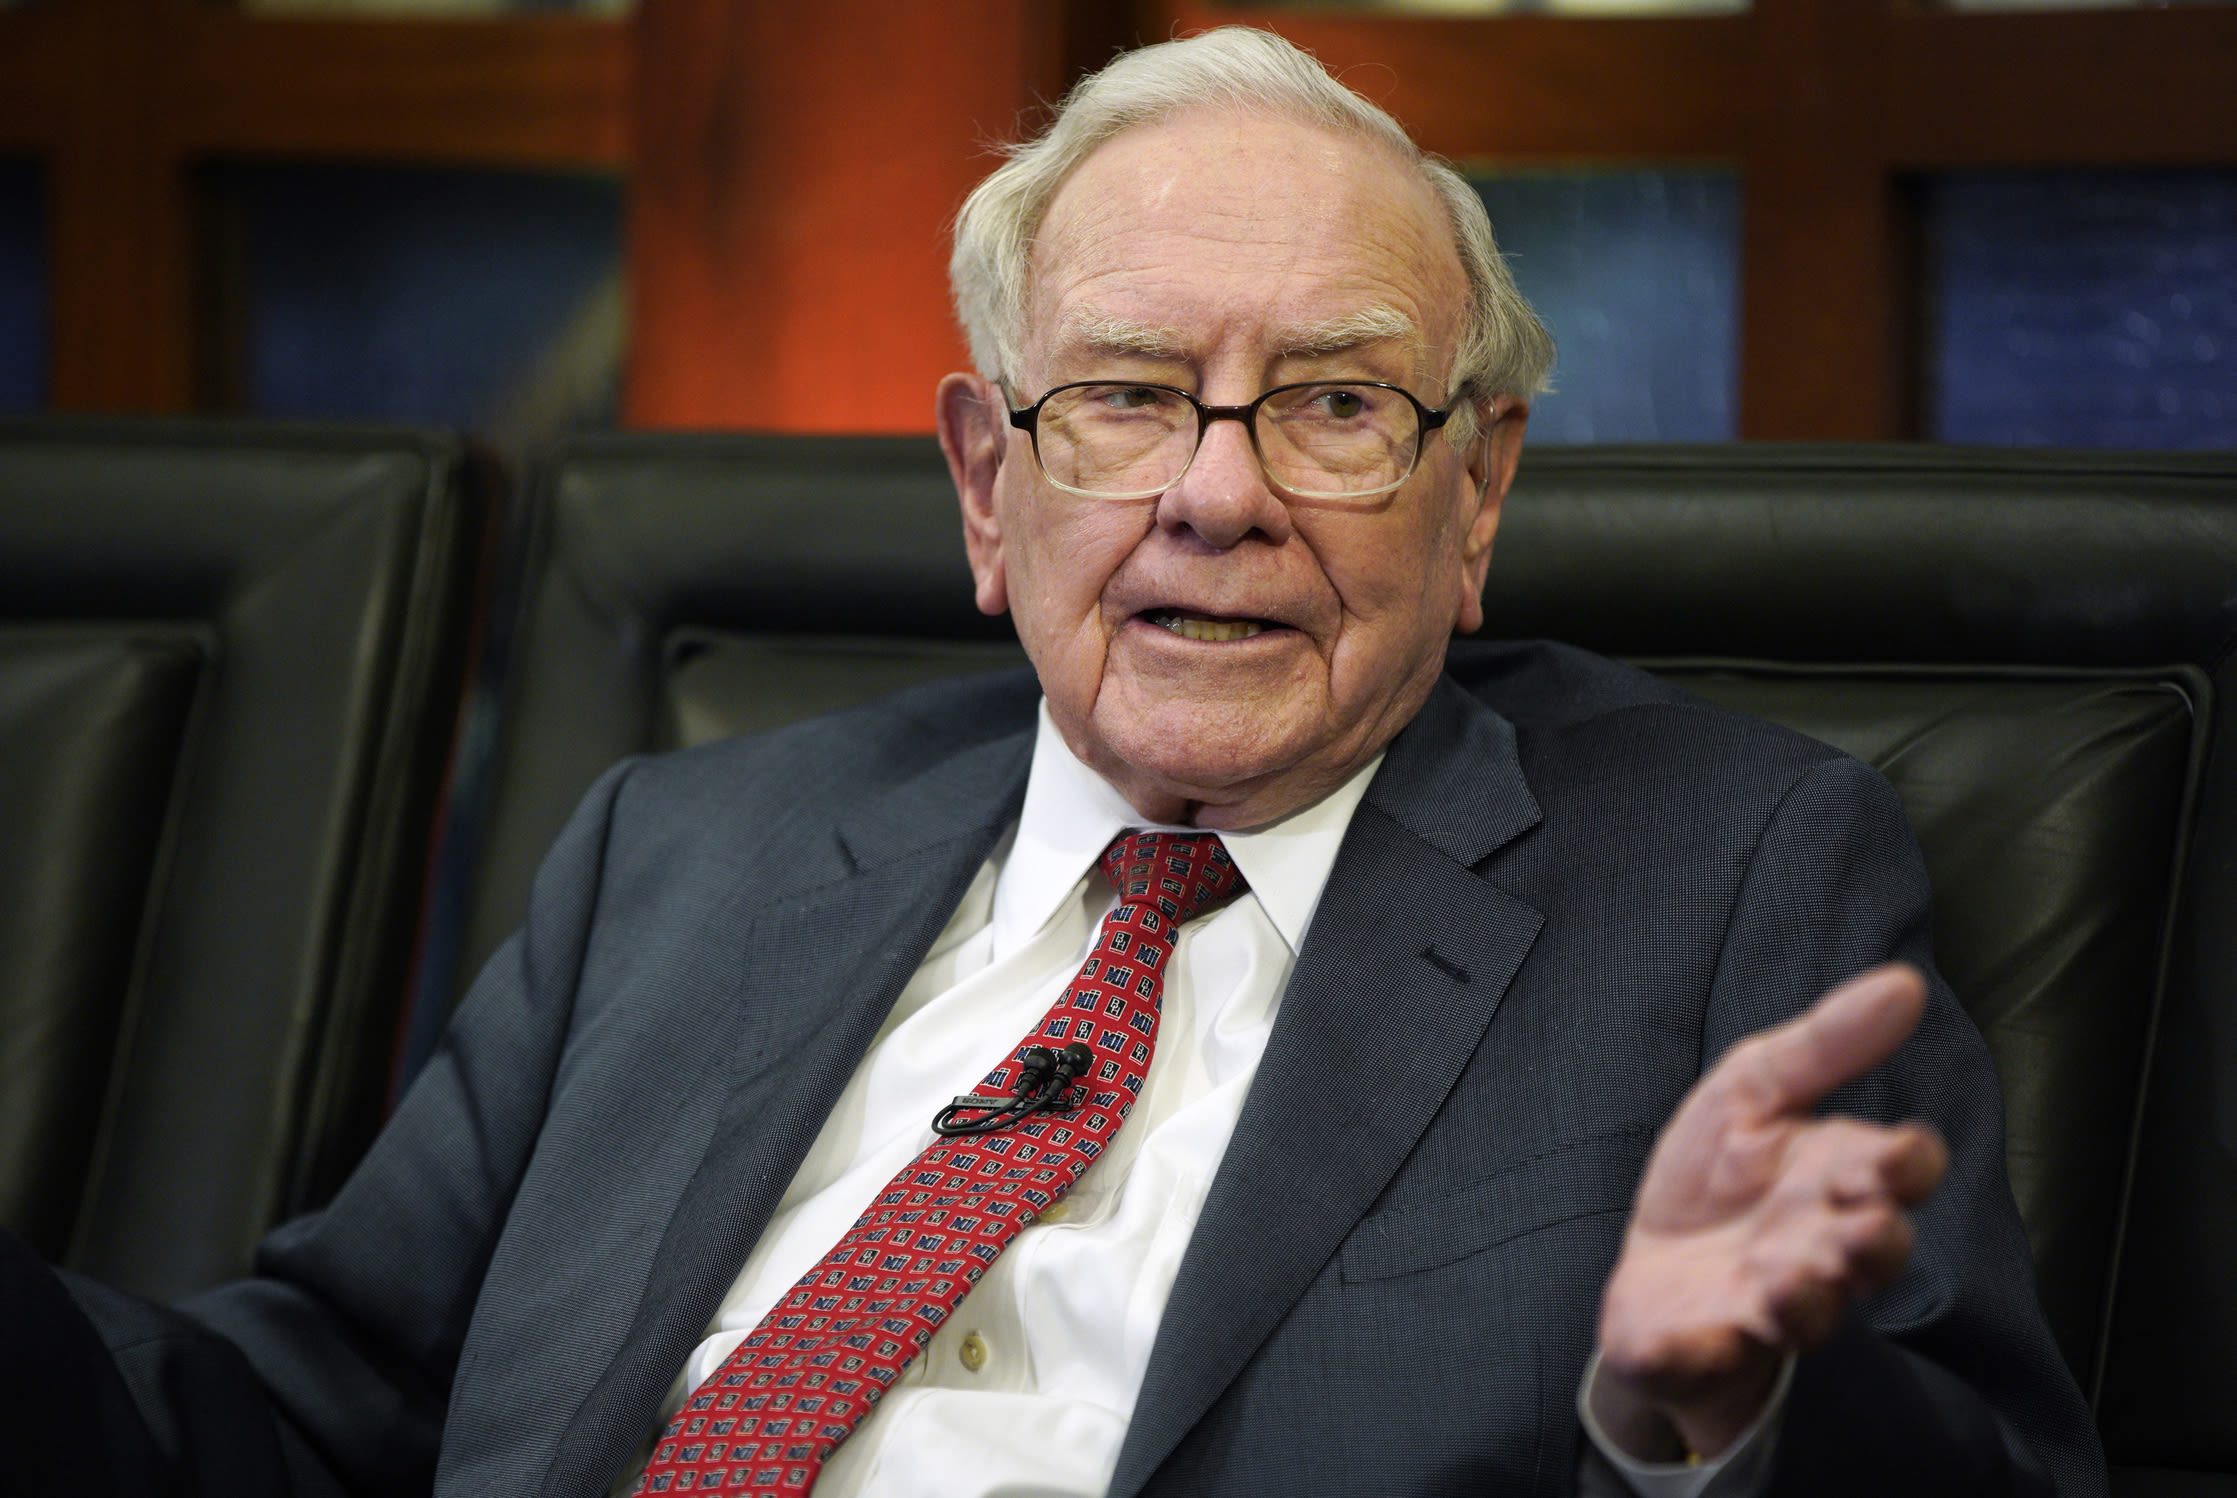 The Oracle of Omaha warns about AI: What Buffett said at Berkshire